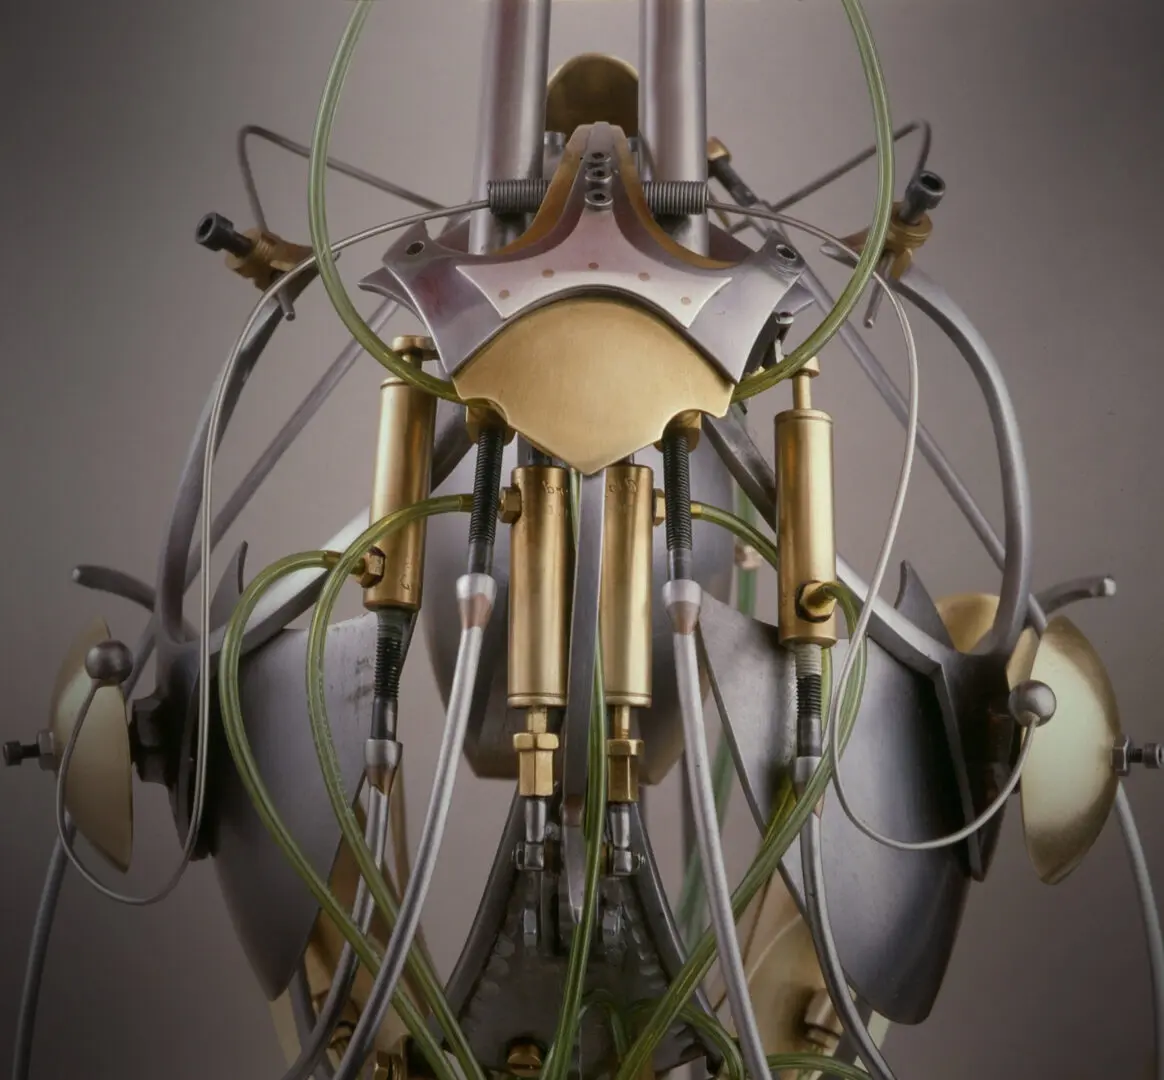 A mechanized sculpture with numerous wires connected to it, created by Ira Sherman.